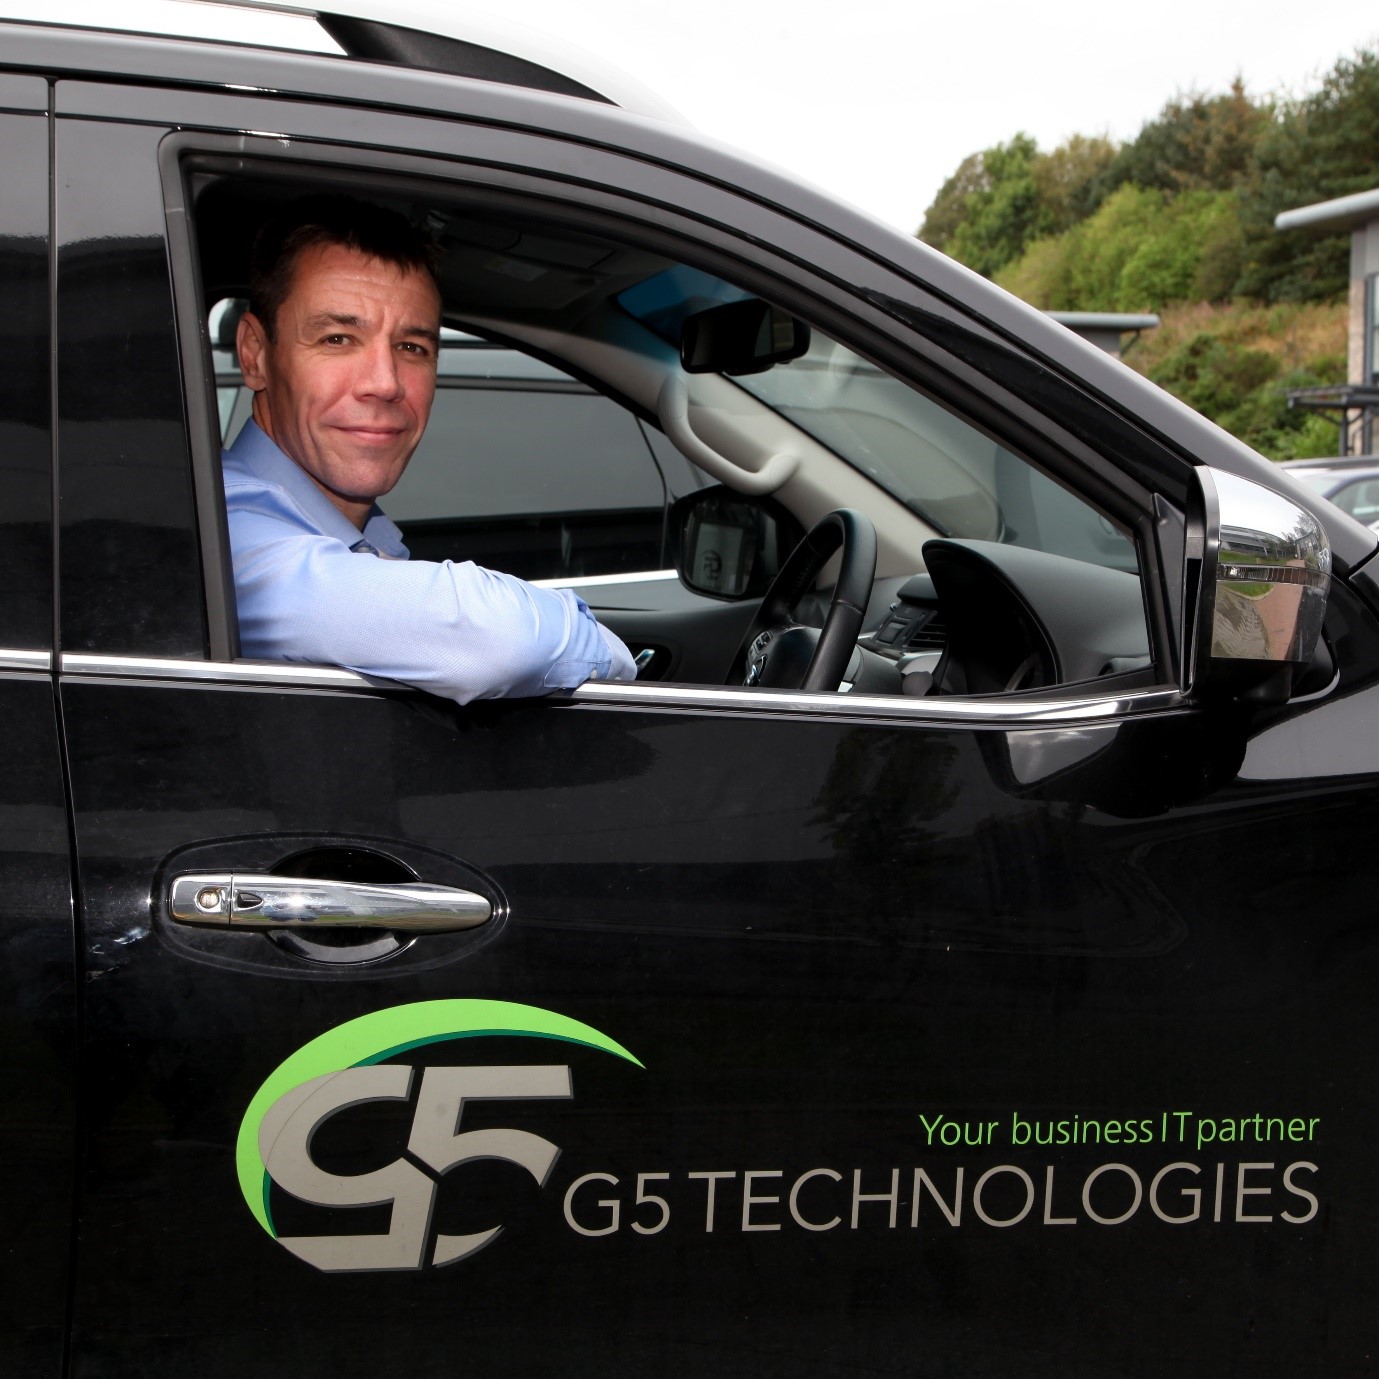 G5 Technologies able to 'dial-up' after £34,000 R&D tax return